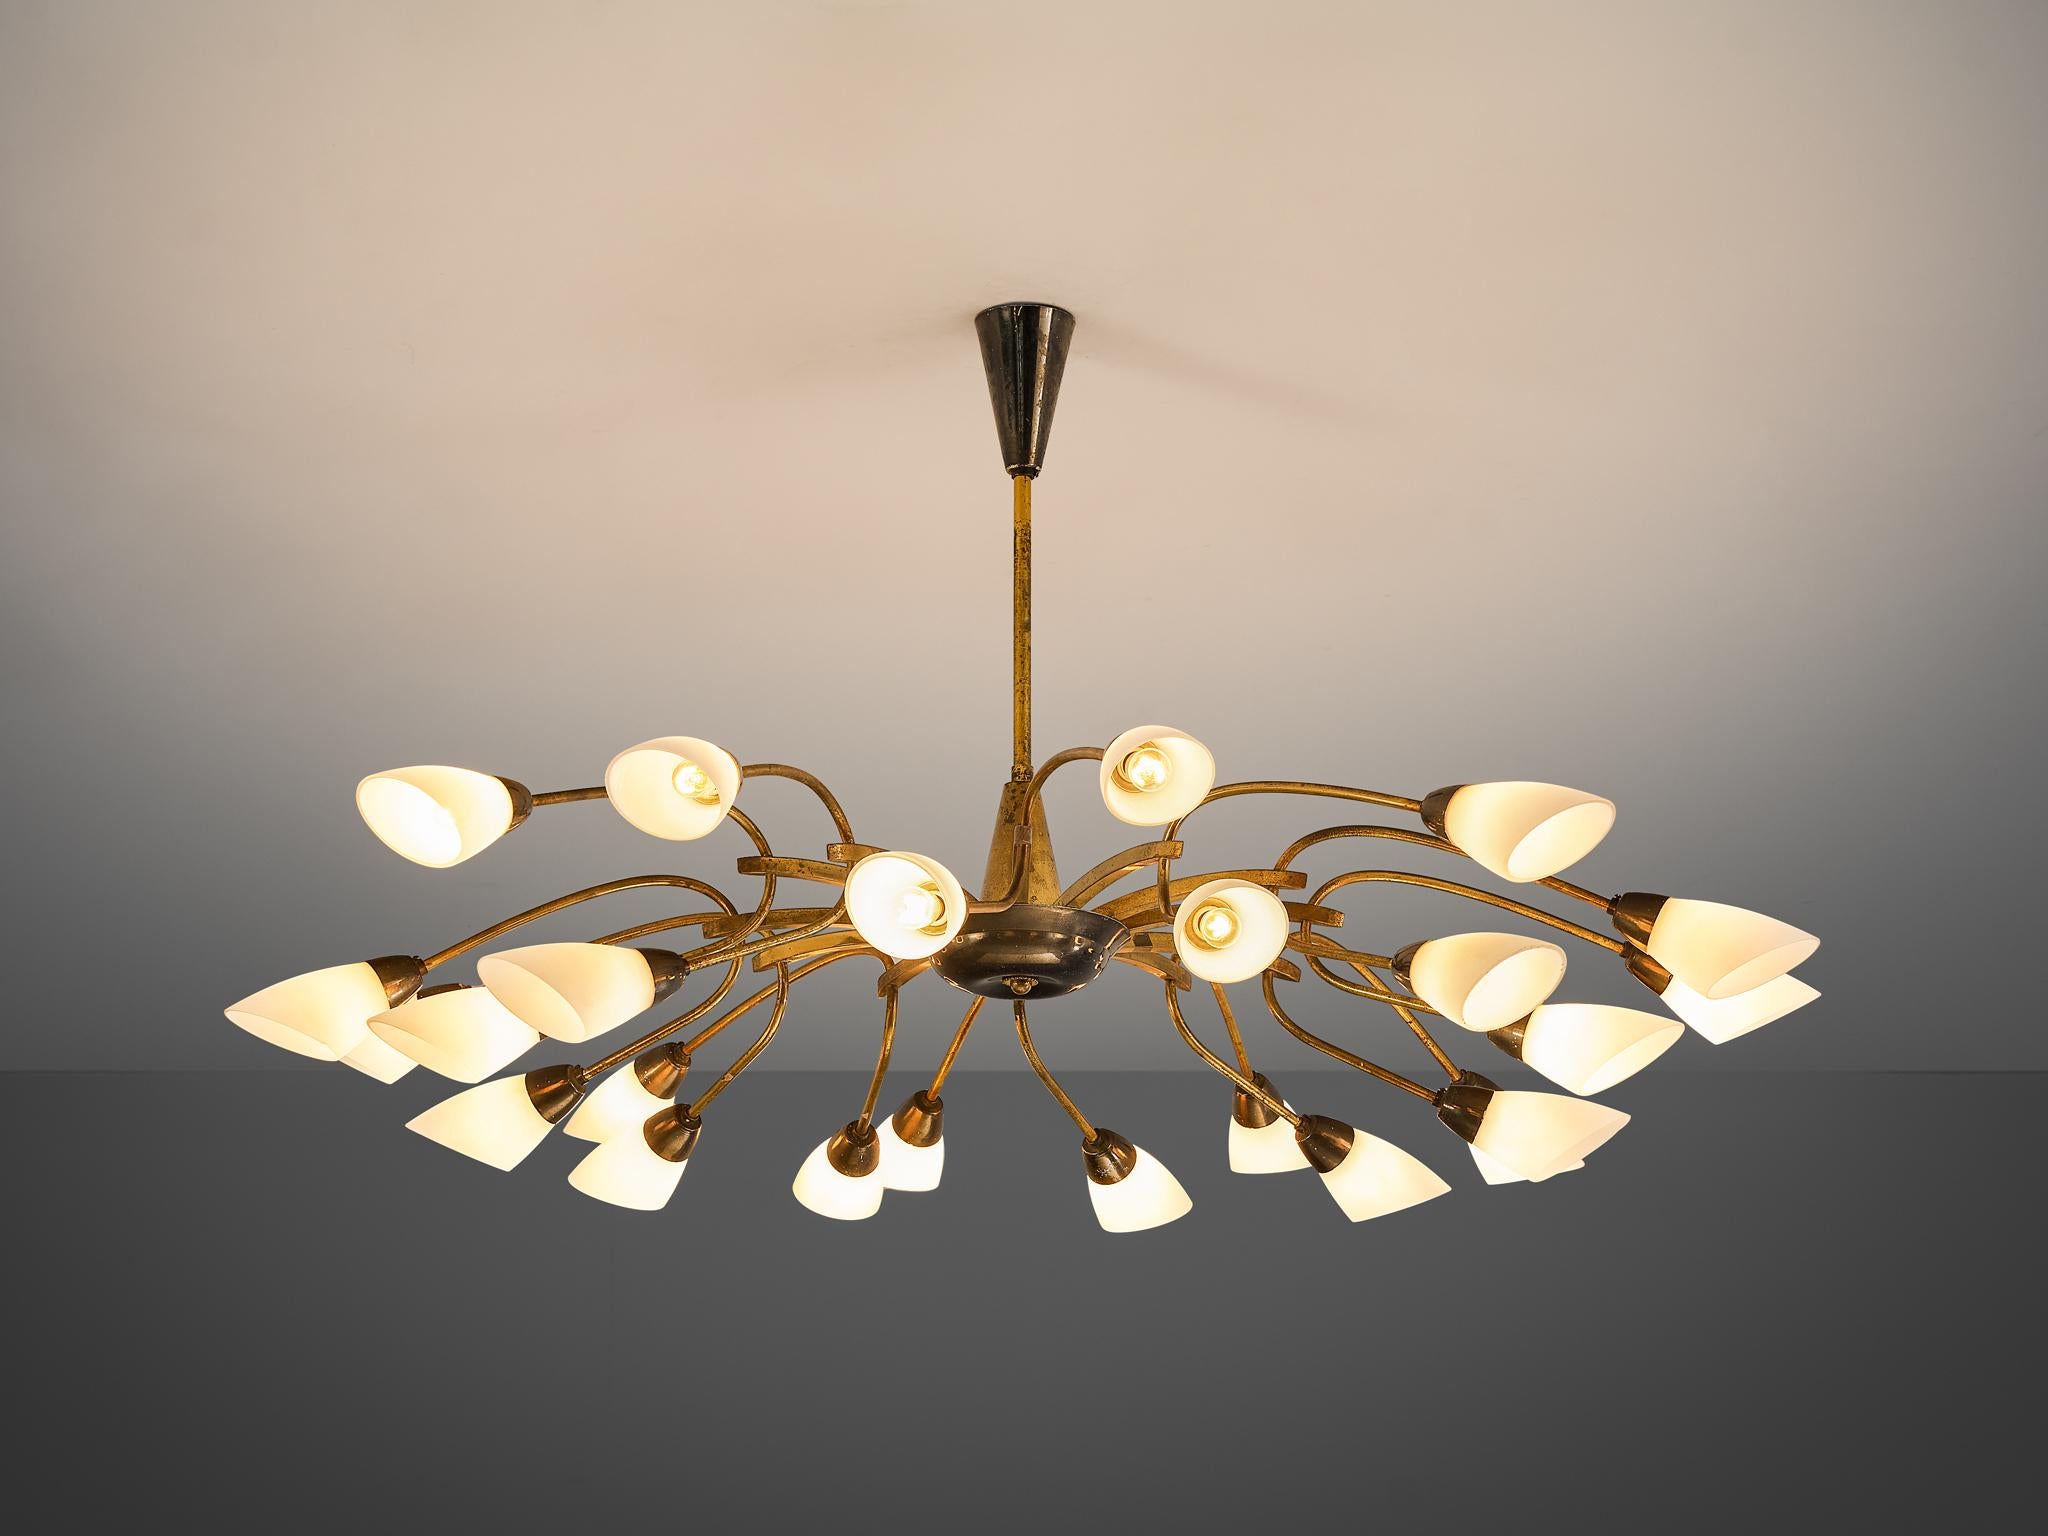 Mid-20th Century Italian Chandelier in Brass and White Opaque Glass 110cm/43.31in 